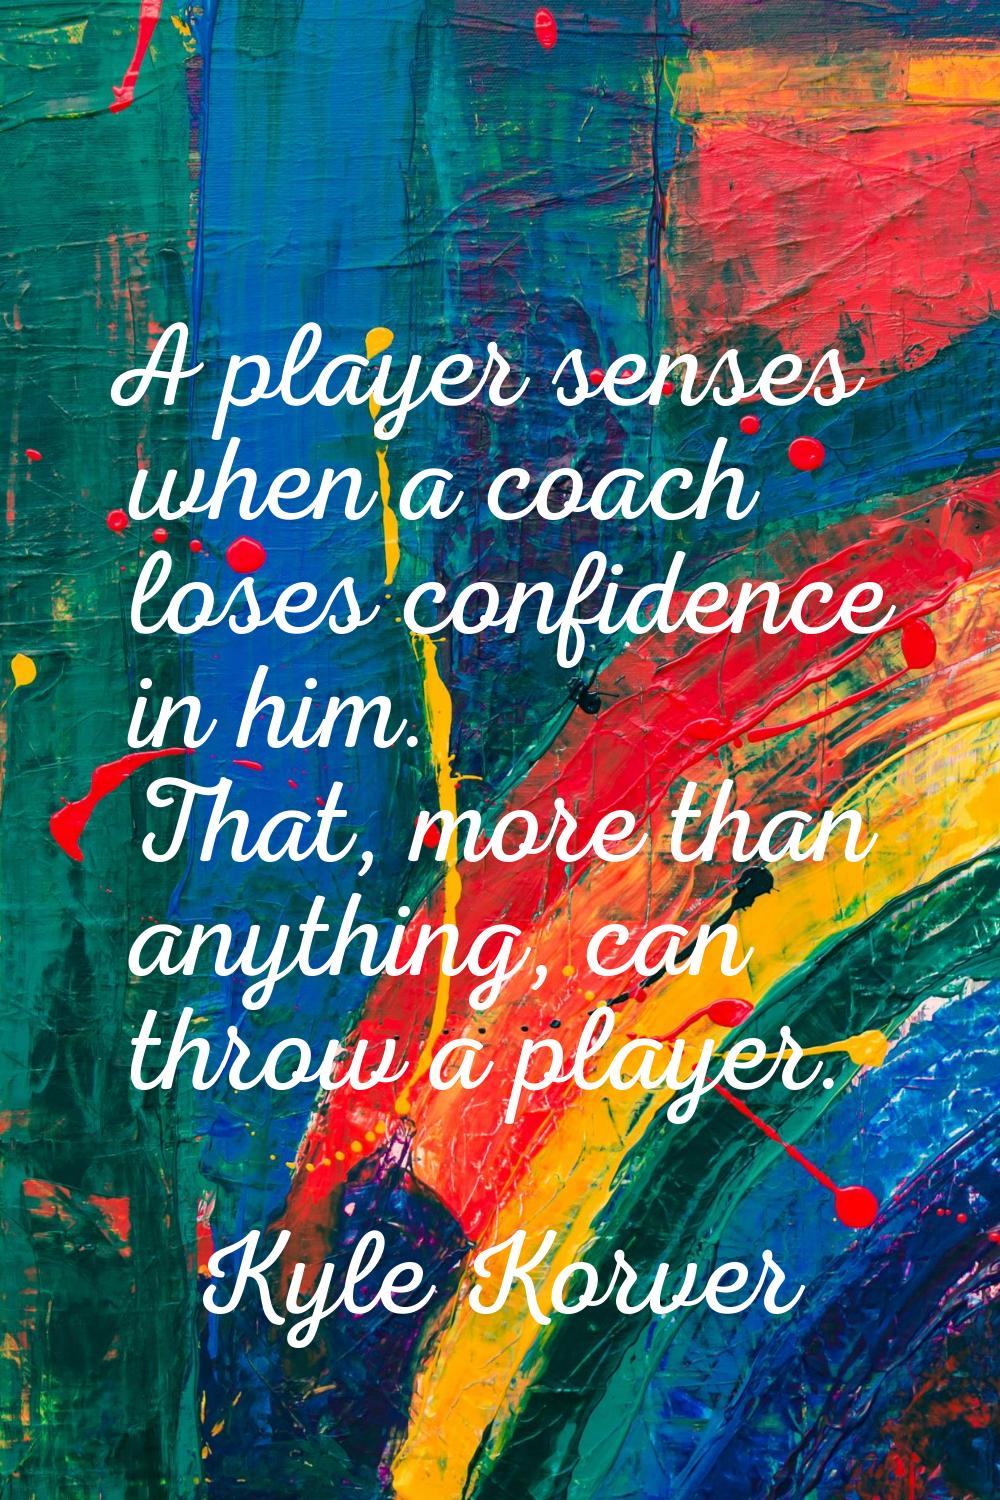 A player senses when a coach loses confidence in him. That, more than anything, can throw a player.